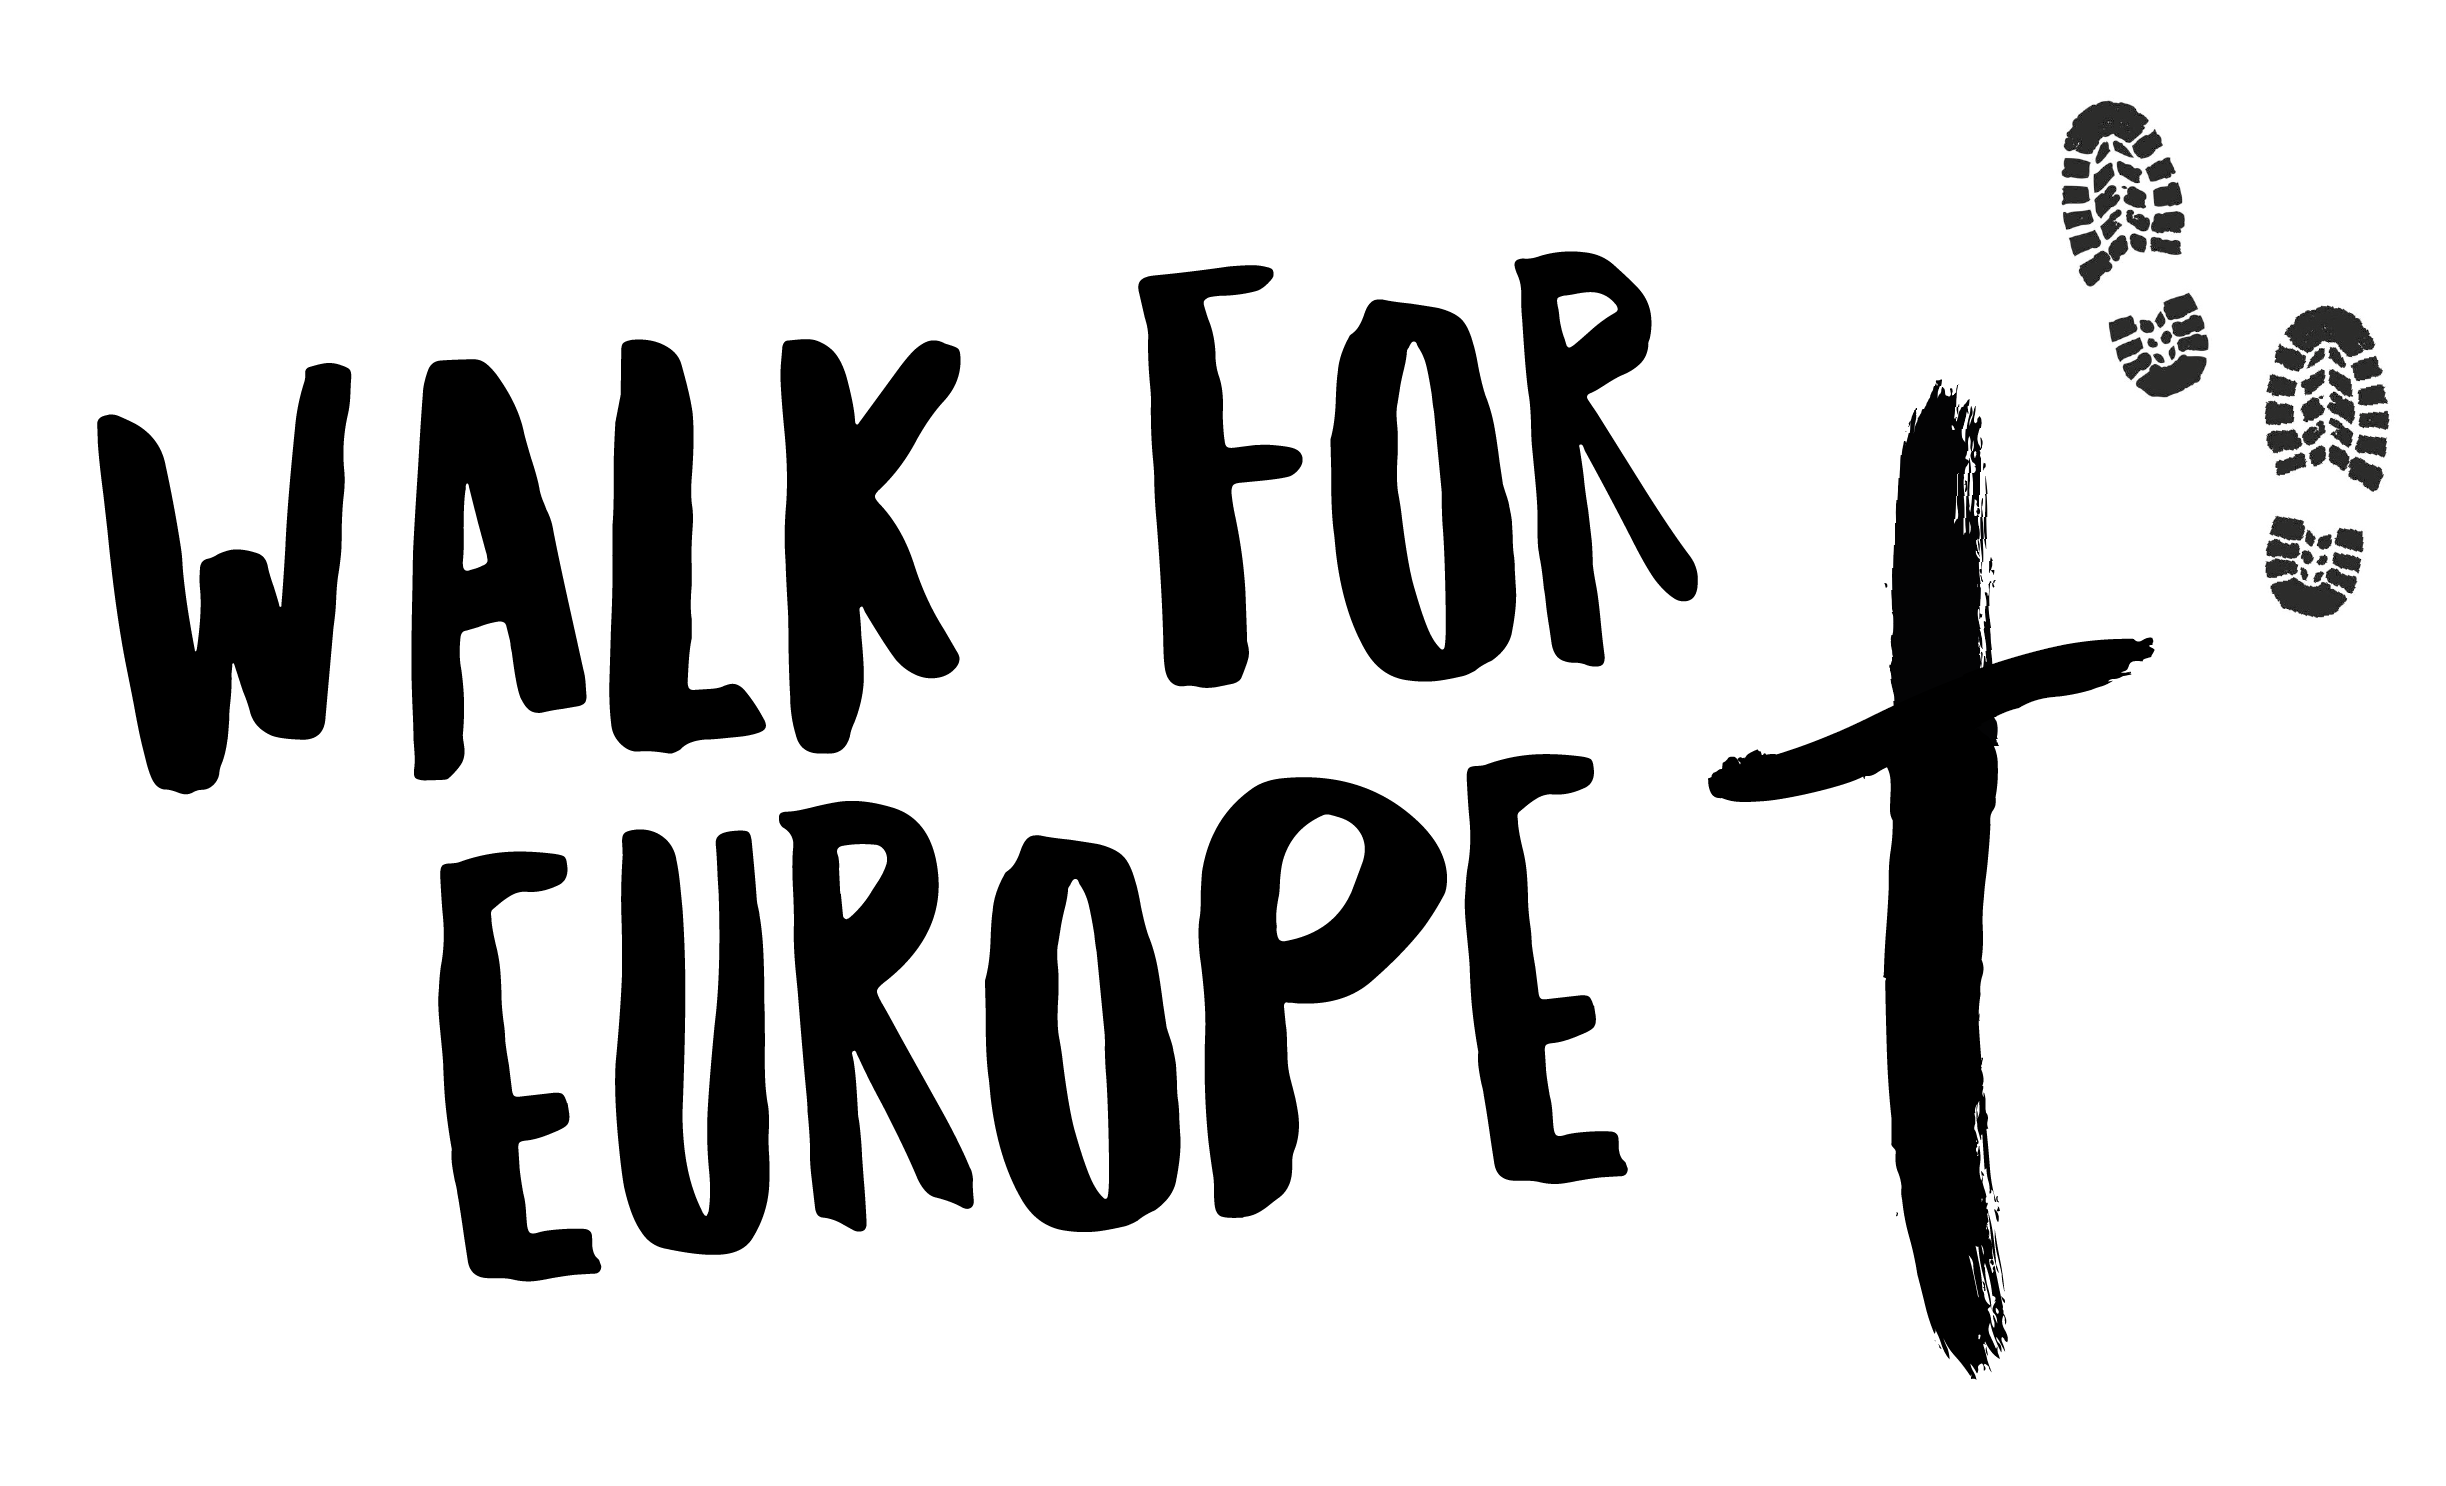 Walk for Europe